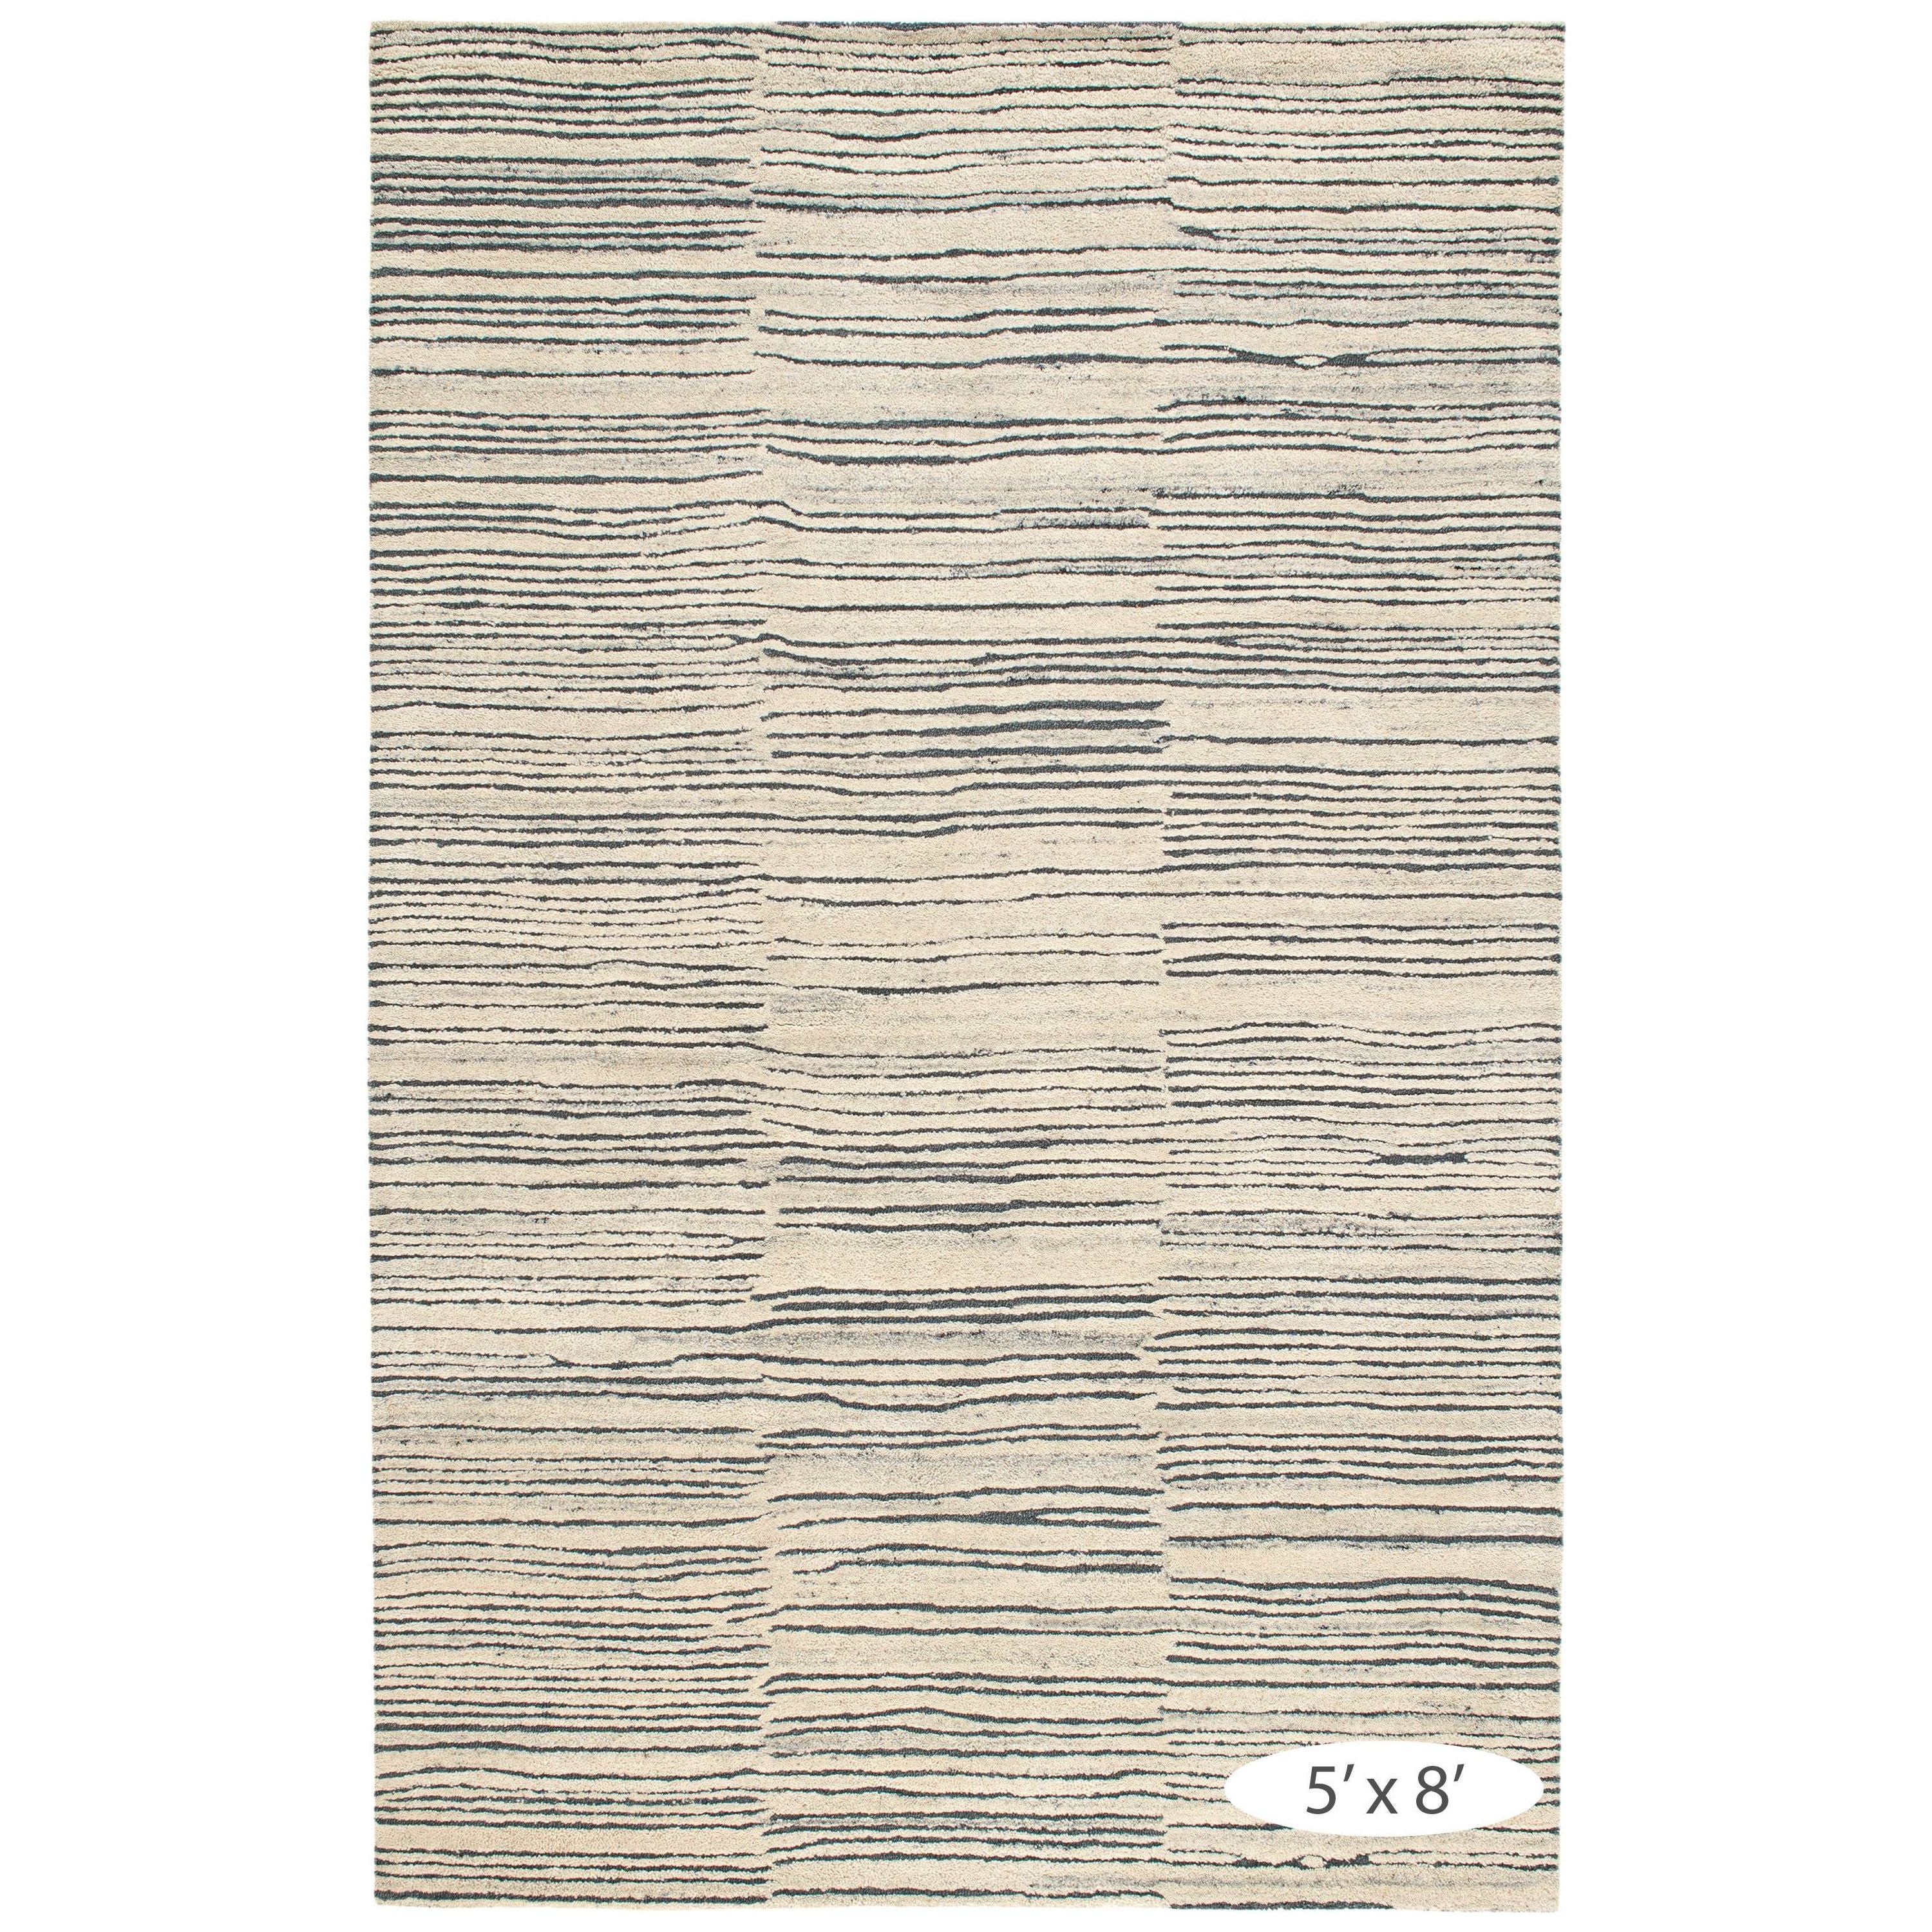 Inspired by substrate layers of sandstone sediments that chronicle the millennia, this luxurious, irregularly striped wool rug will stand the test of time. The subtle degradations of a natural undyed fleece pile enhance the finely observed irregular striping in a softly mineral palette. The subtle beauty of the higher sheared tufts emphasizes the contrast of the densely looped stripes. Amethyst Home provides interior design, new construction, custom furniture, and area rugs in the Miami metro area.